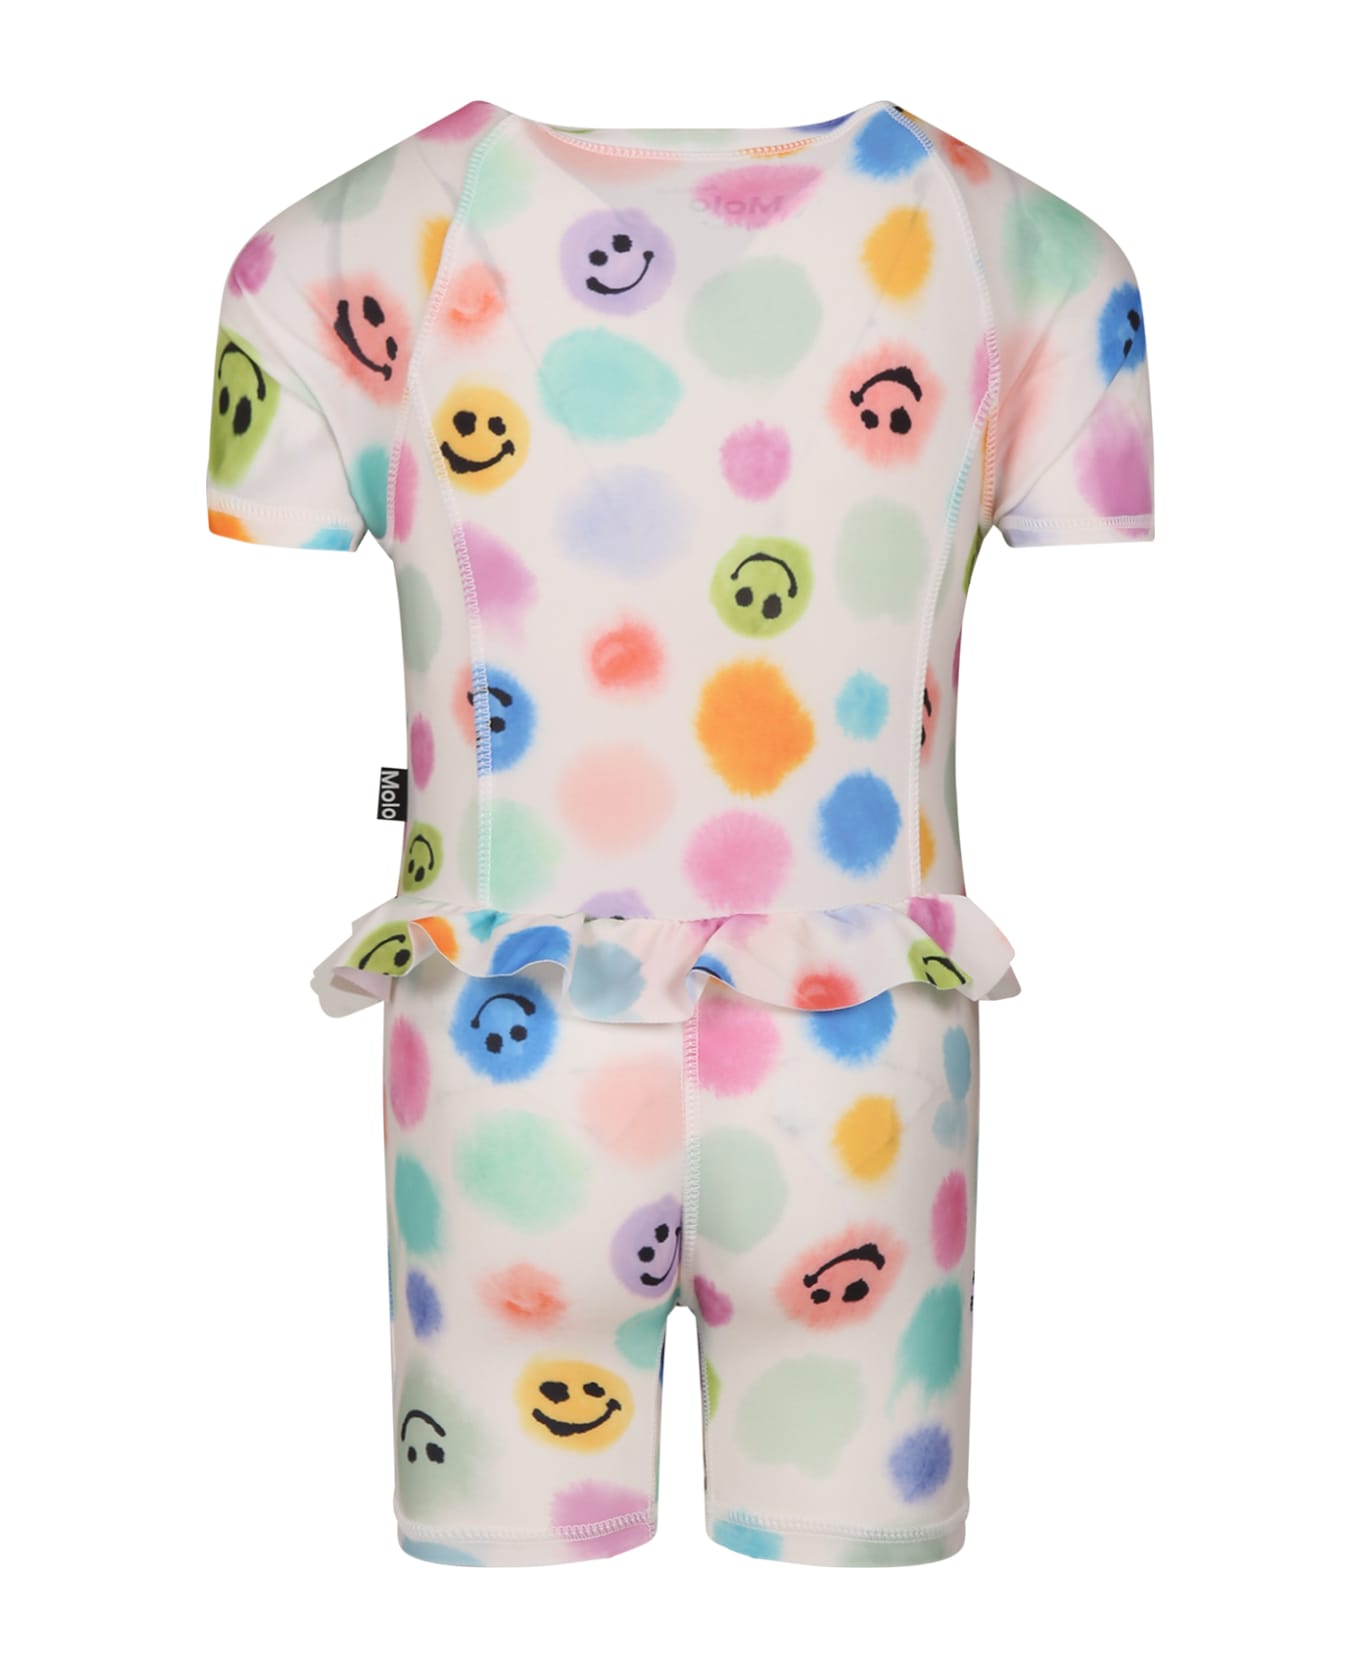 Molo White Swimsuit For Kids With Polka Dots And Smile - Multicolor Tシャツ＆ポロシャツ